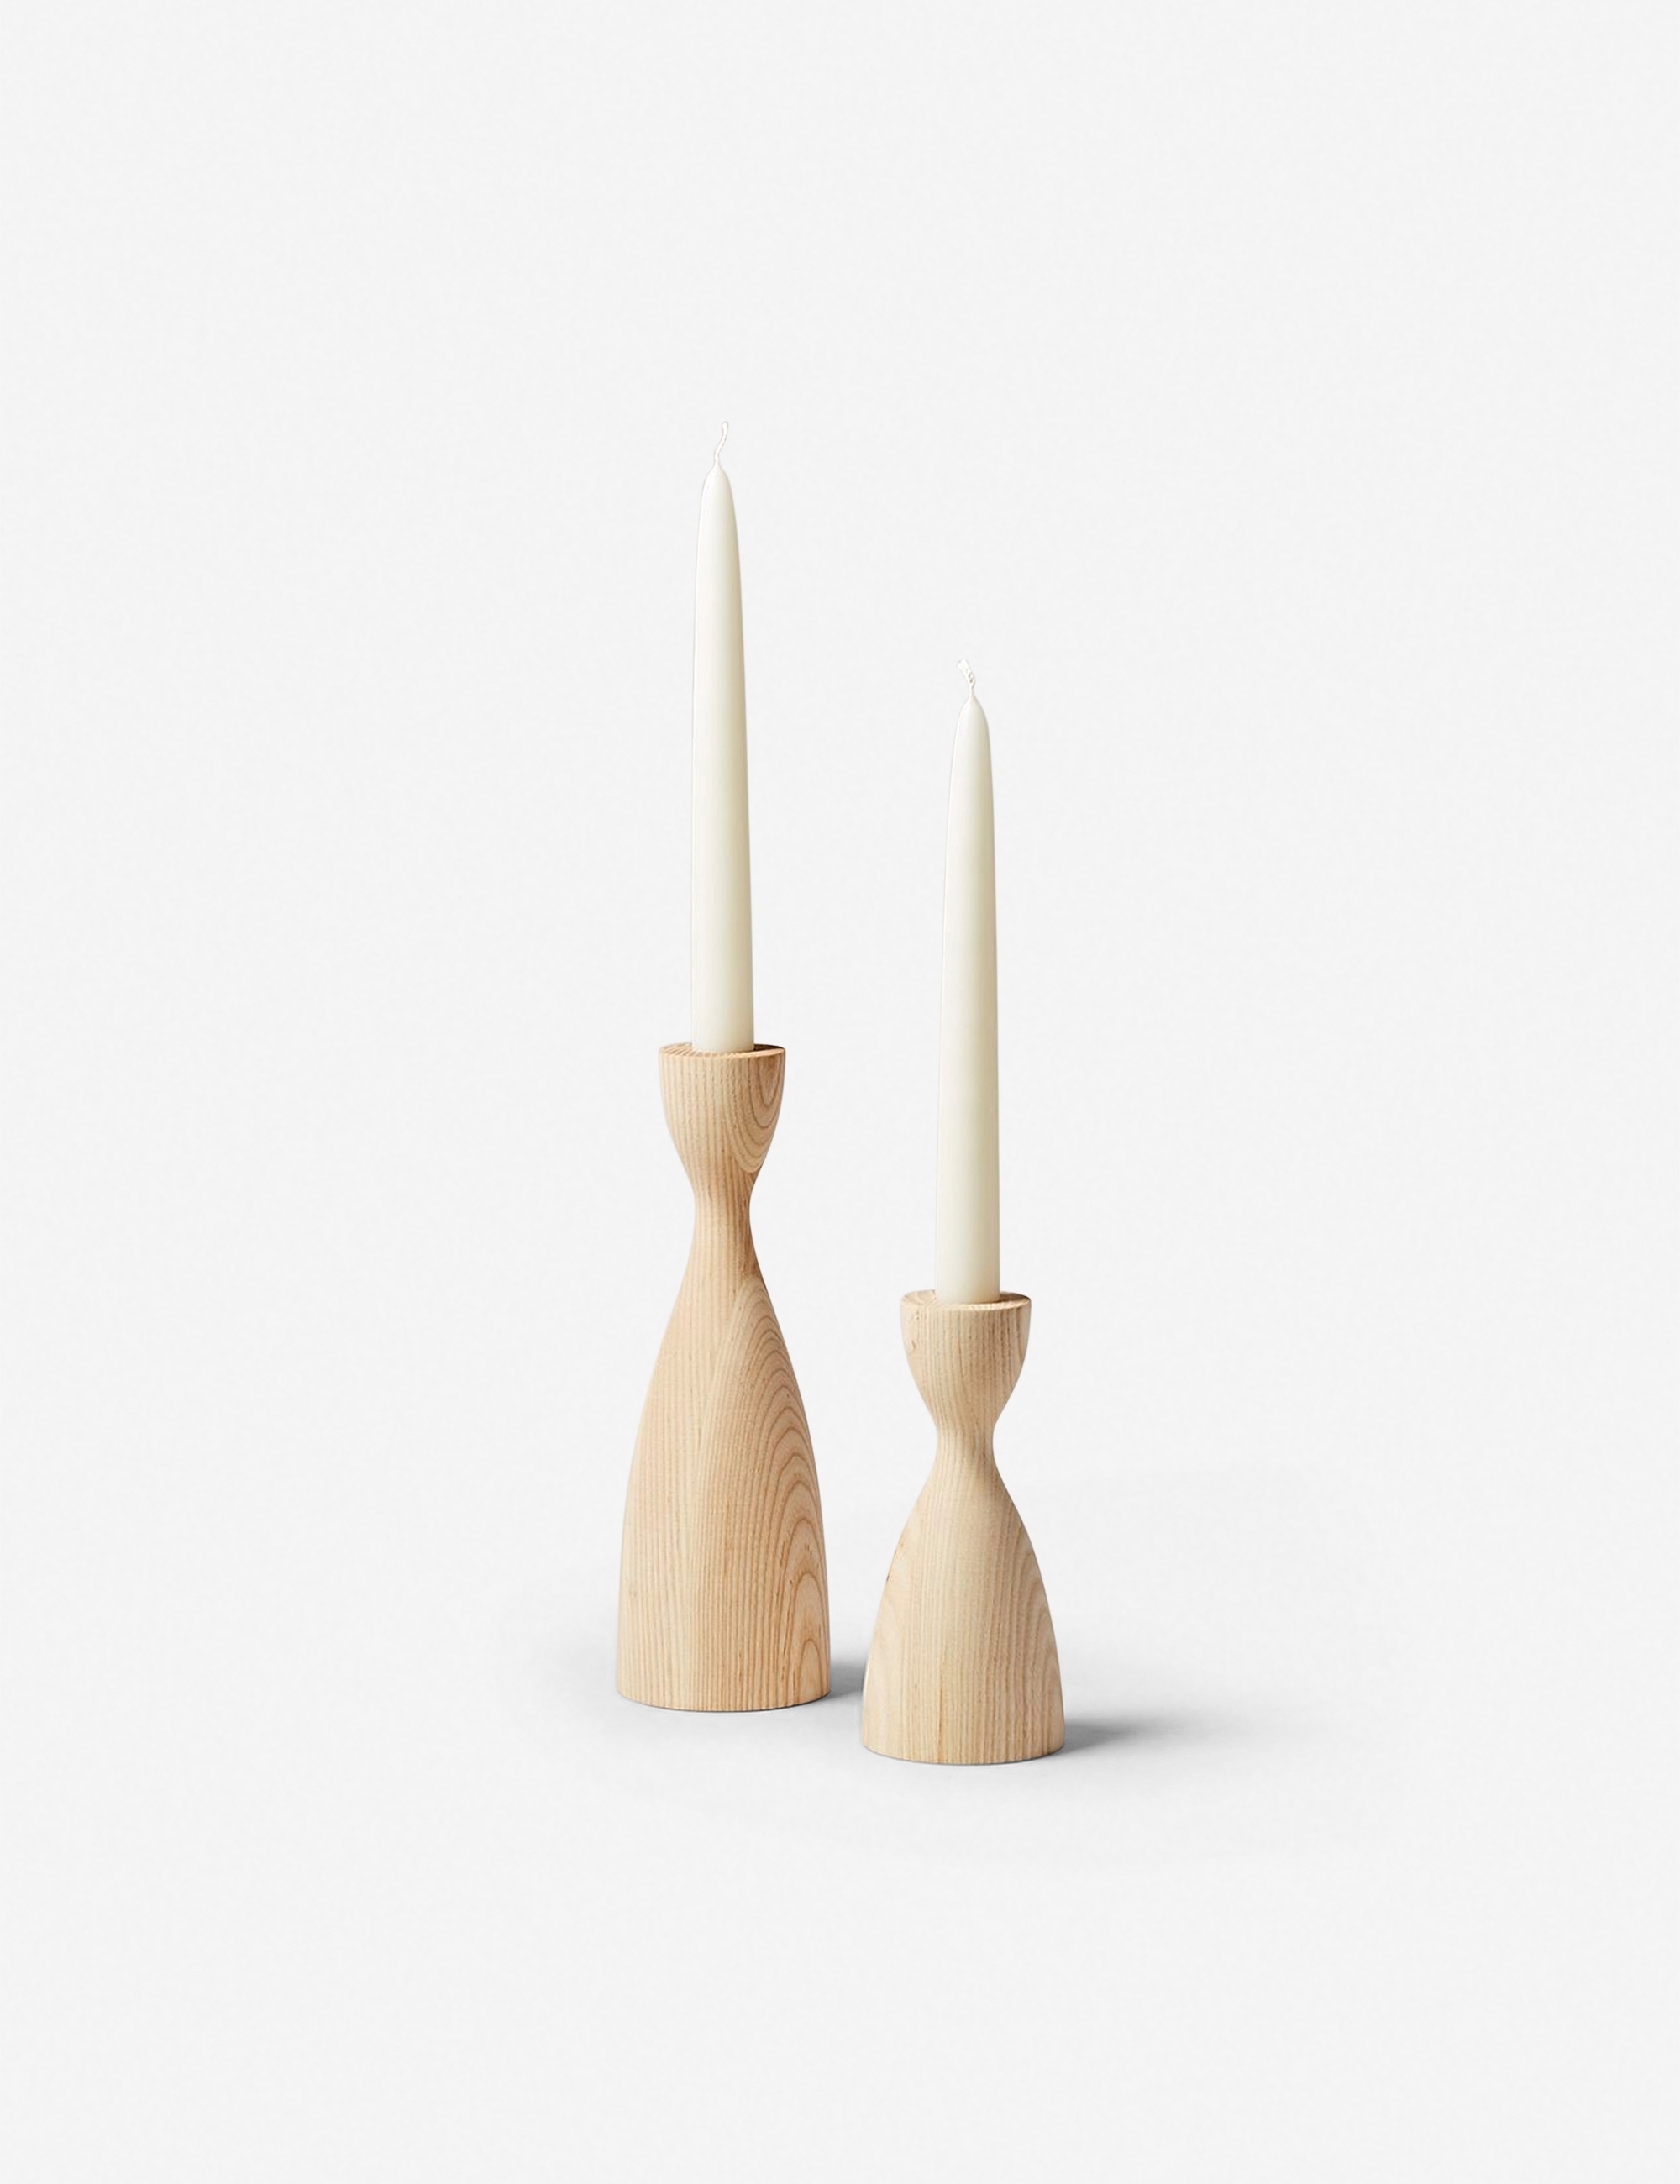 Pantry Candlestick by Farmhouse Pottery - Image 1